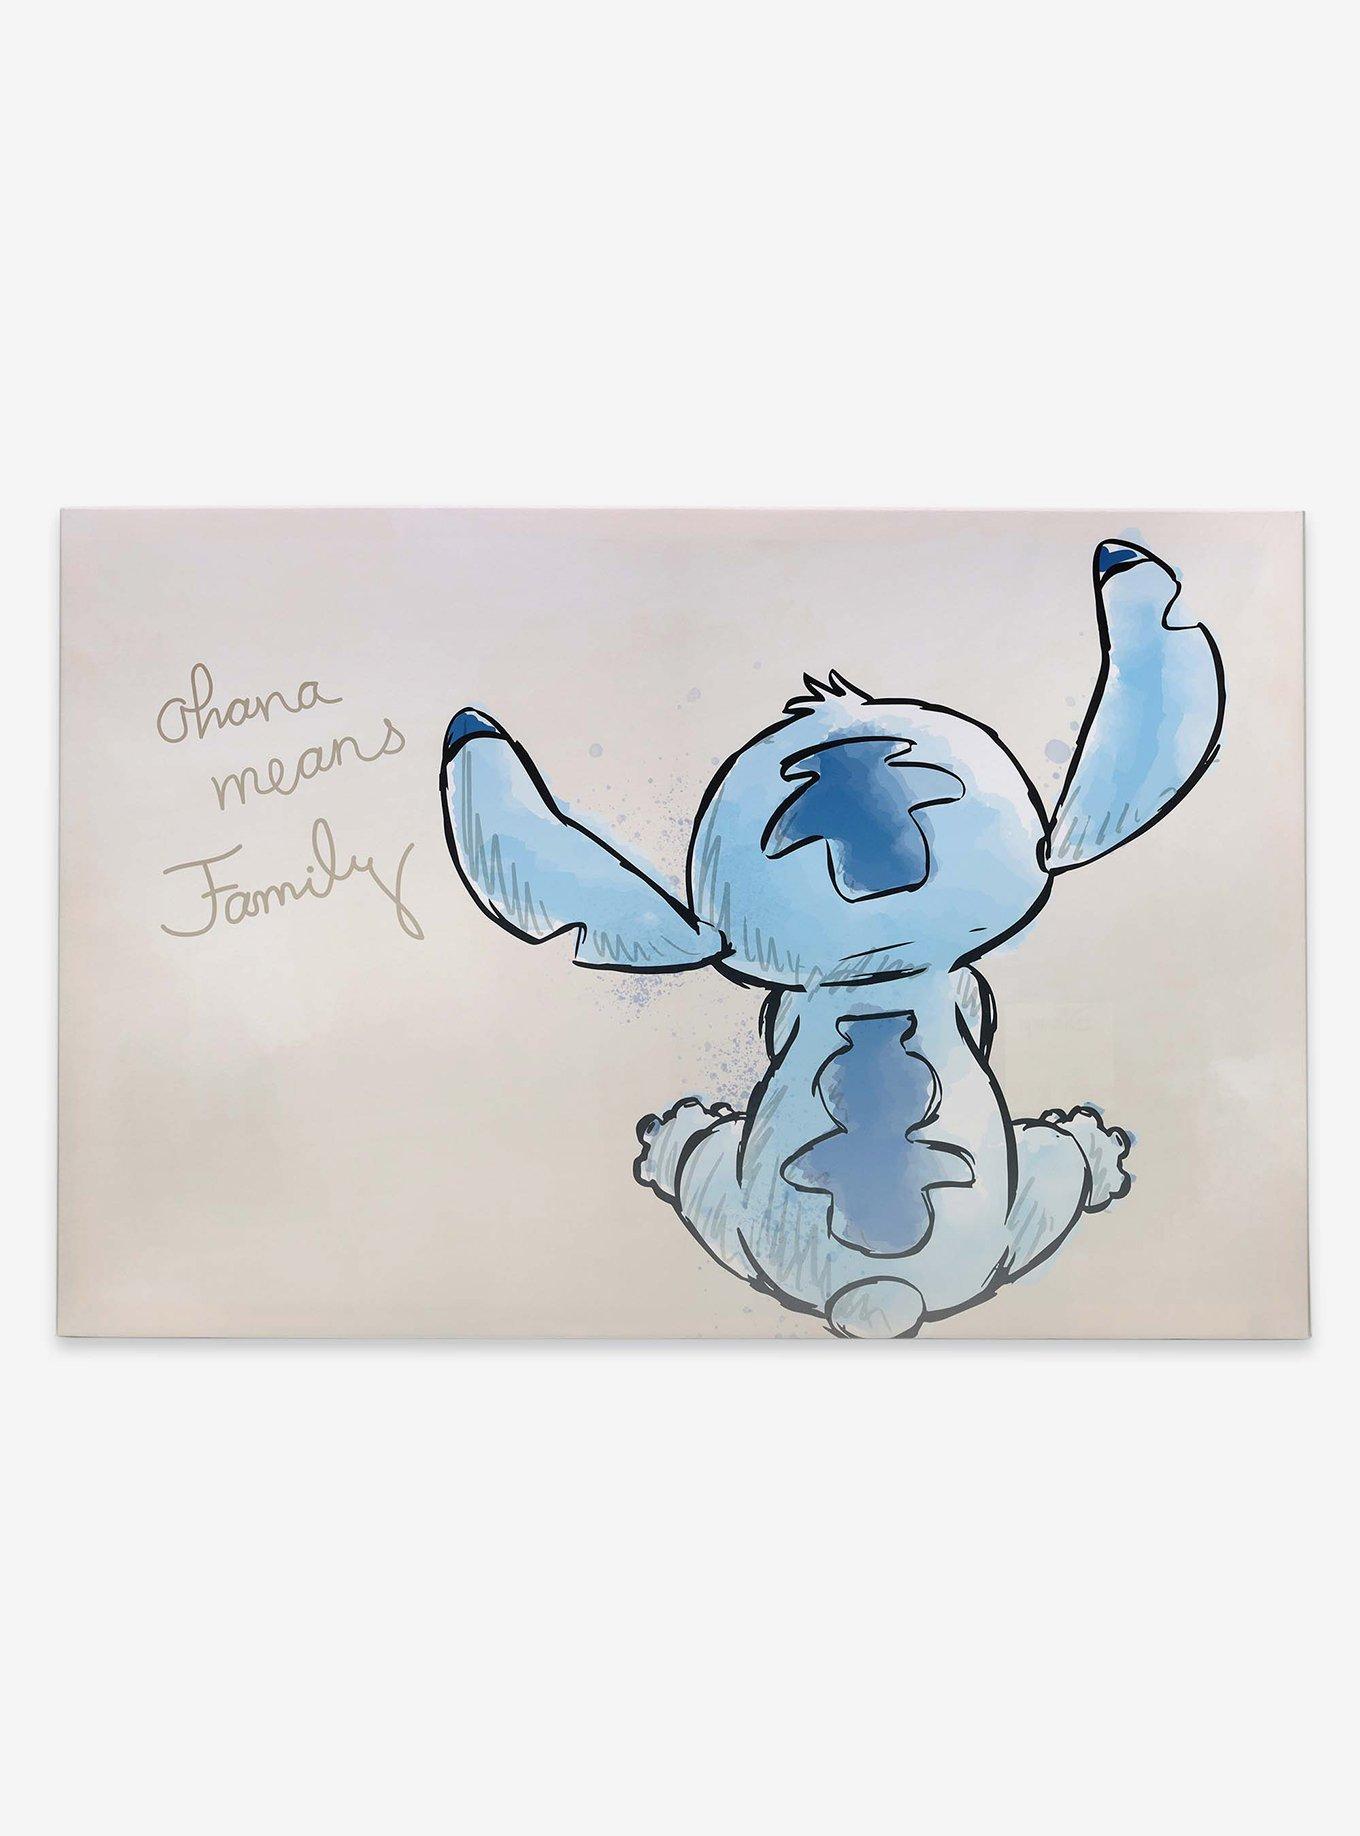 Ohana Means Family - Inspired by Lilo and Stitch - Watercolored Poster –  Simply Remarkable